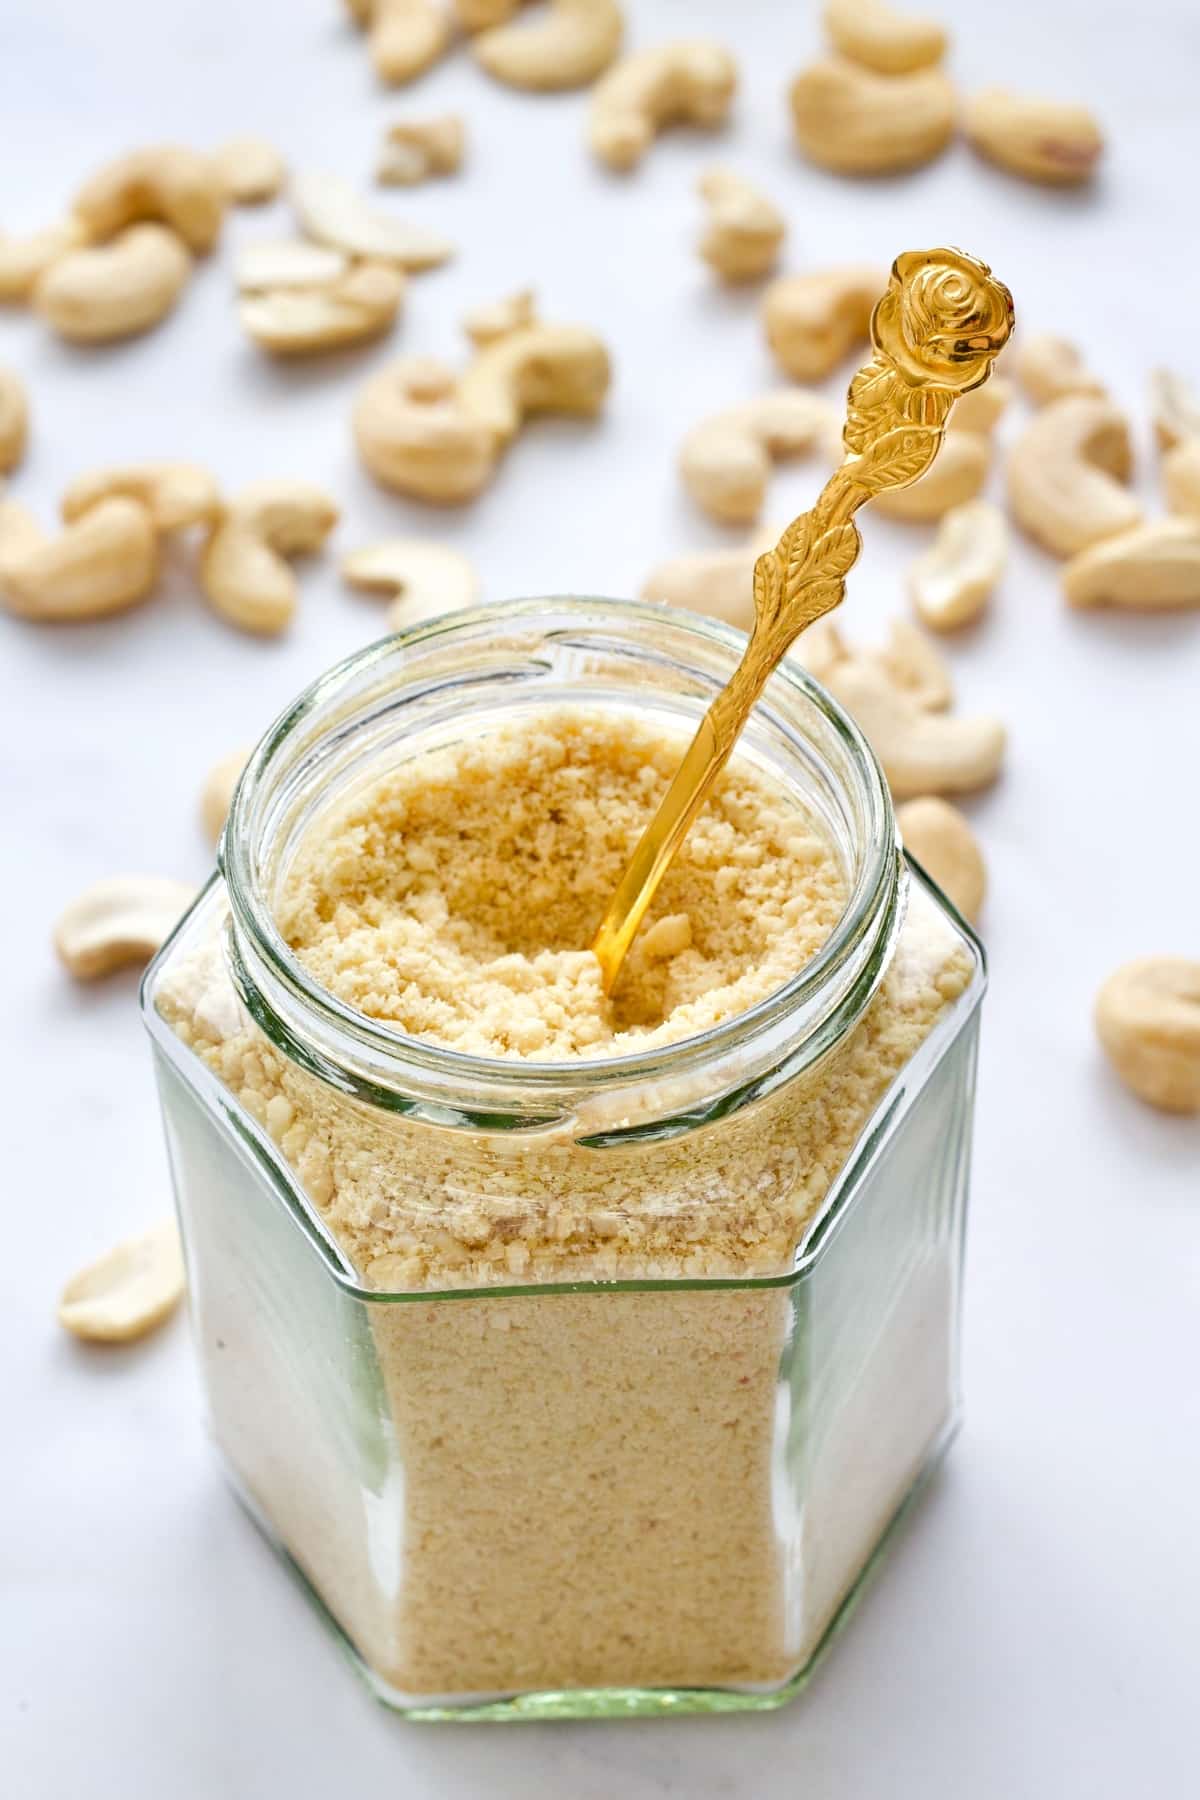 Vegan cashew parmesan in a jar with a spoon, scattered cashew nuts.